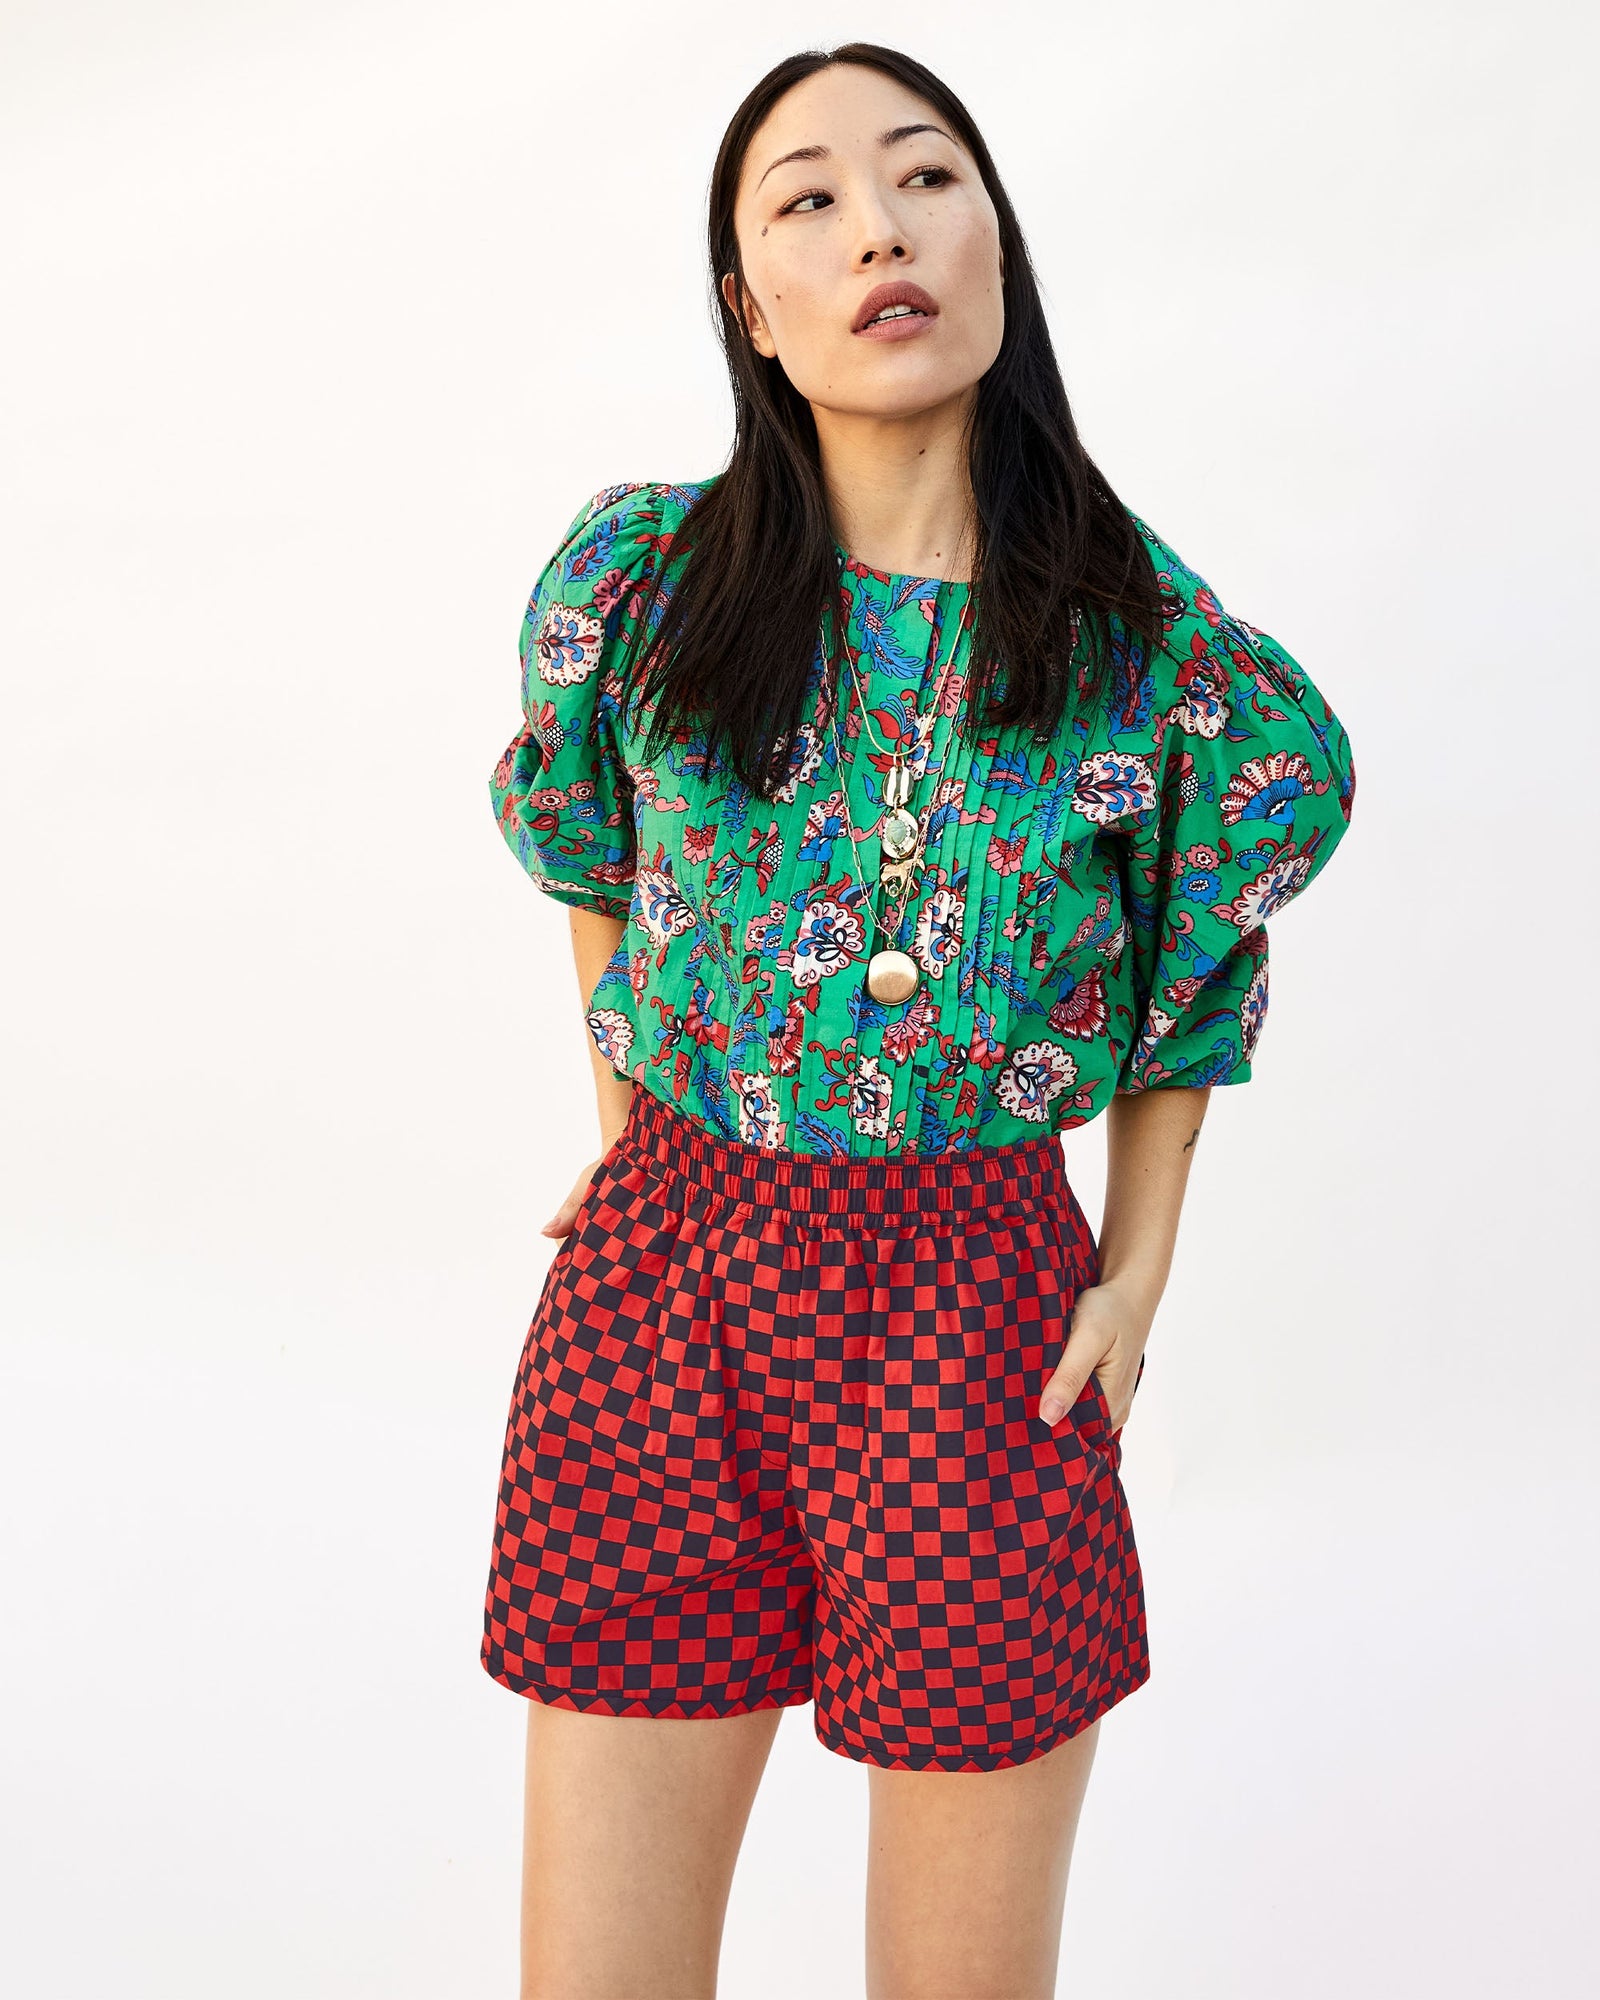 Ami wearing our Green Francoise Blouse